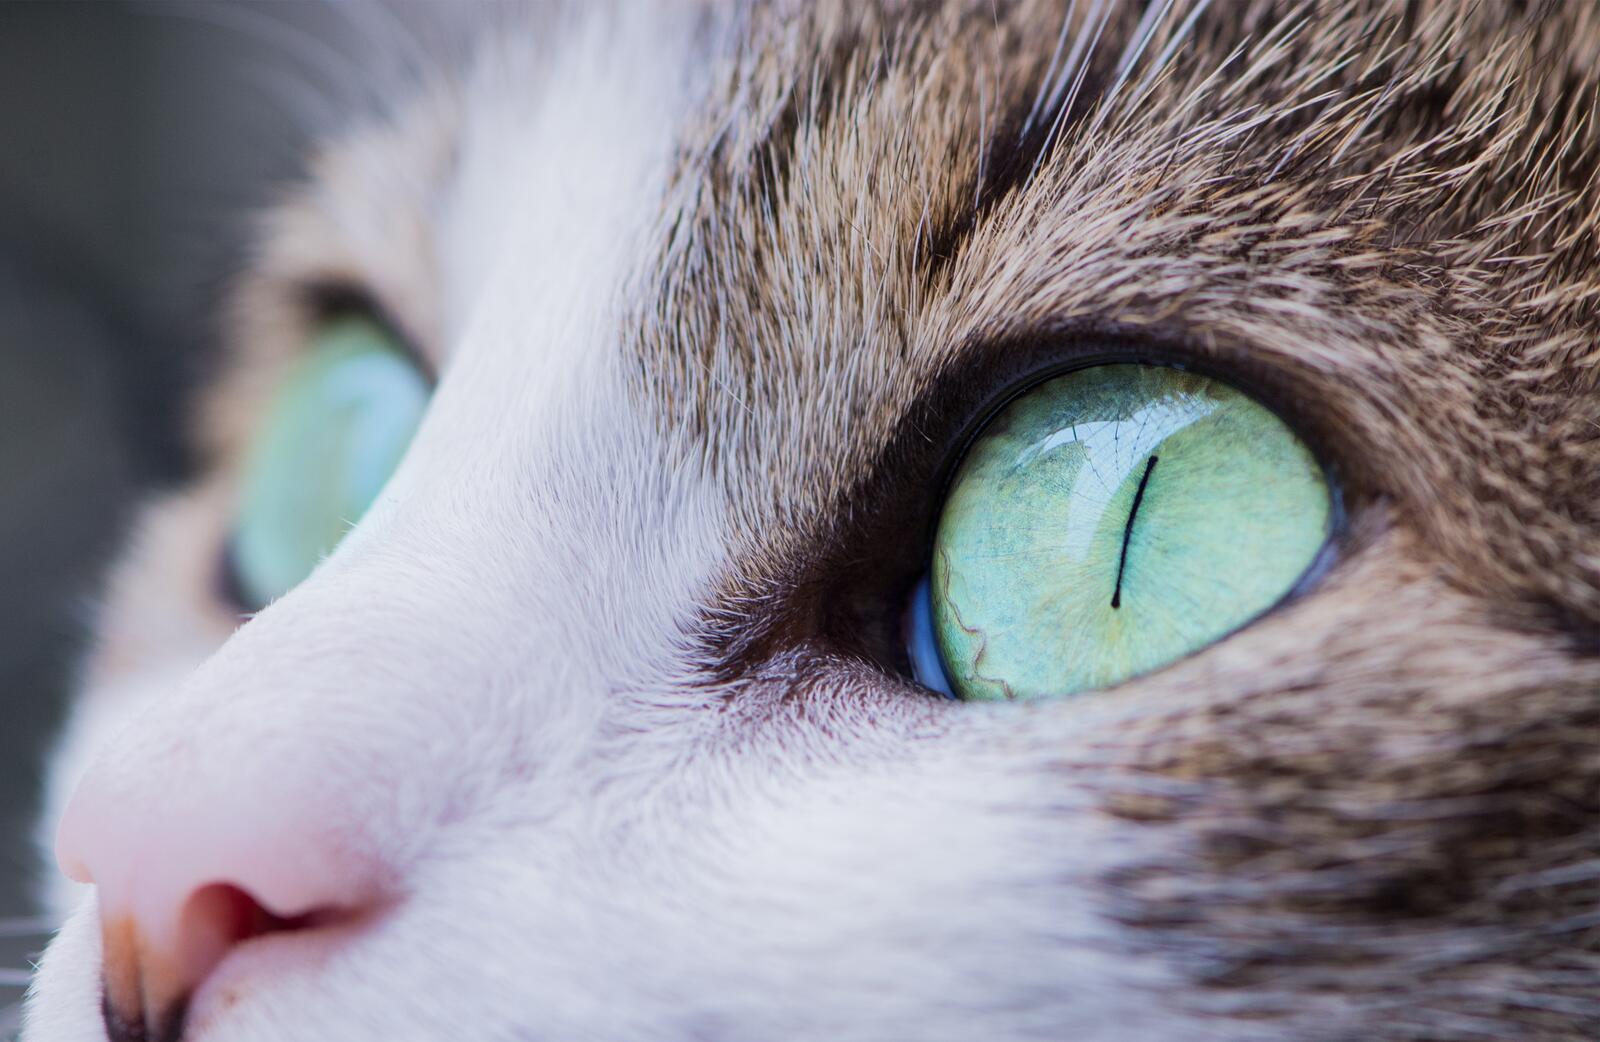 Wallpapers cats cat eyes muzzle on the desktop